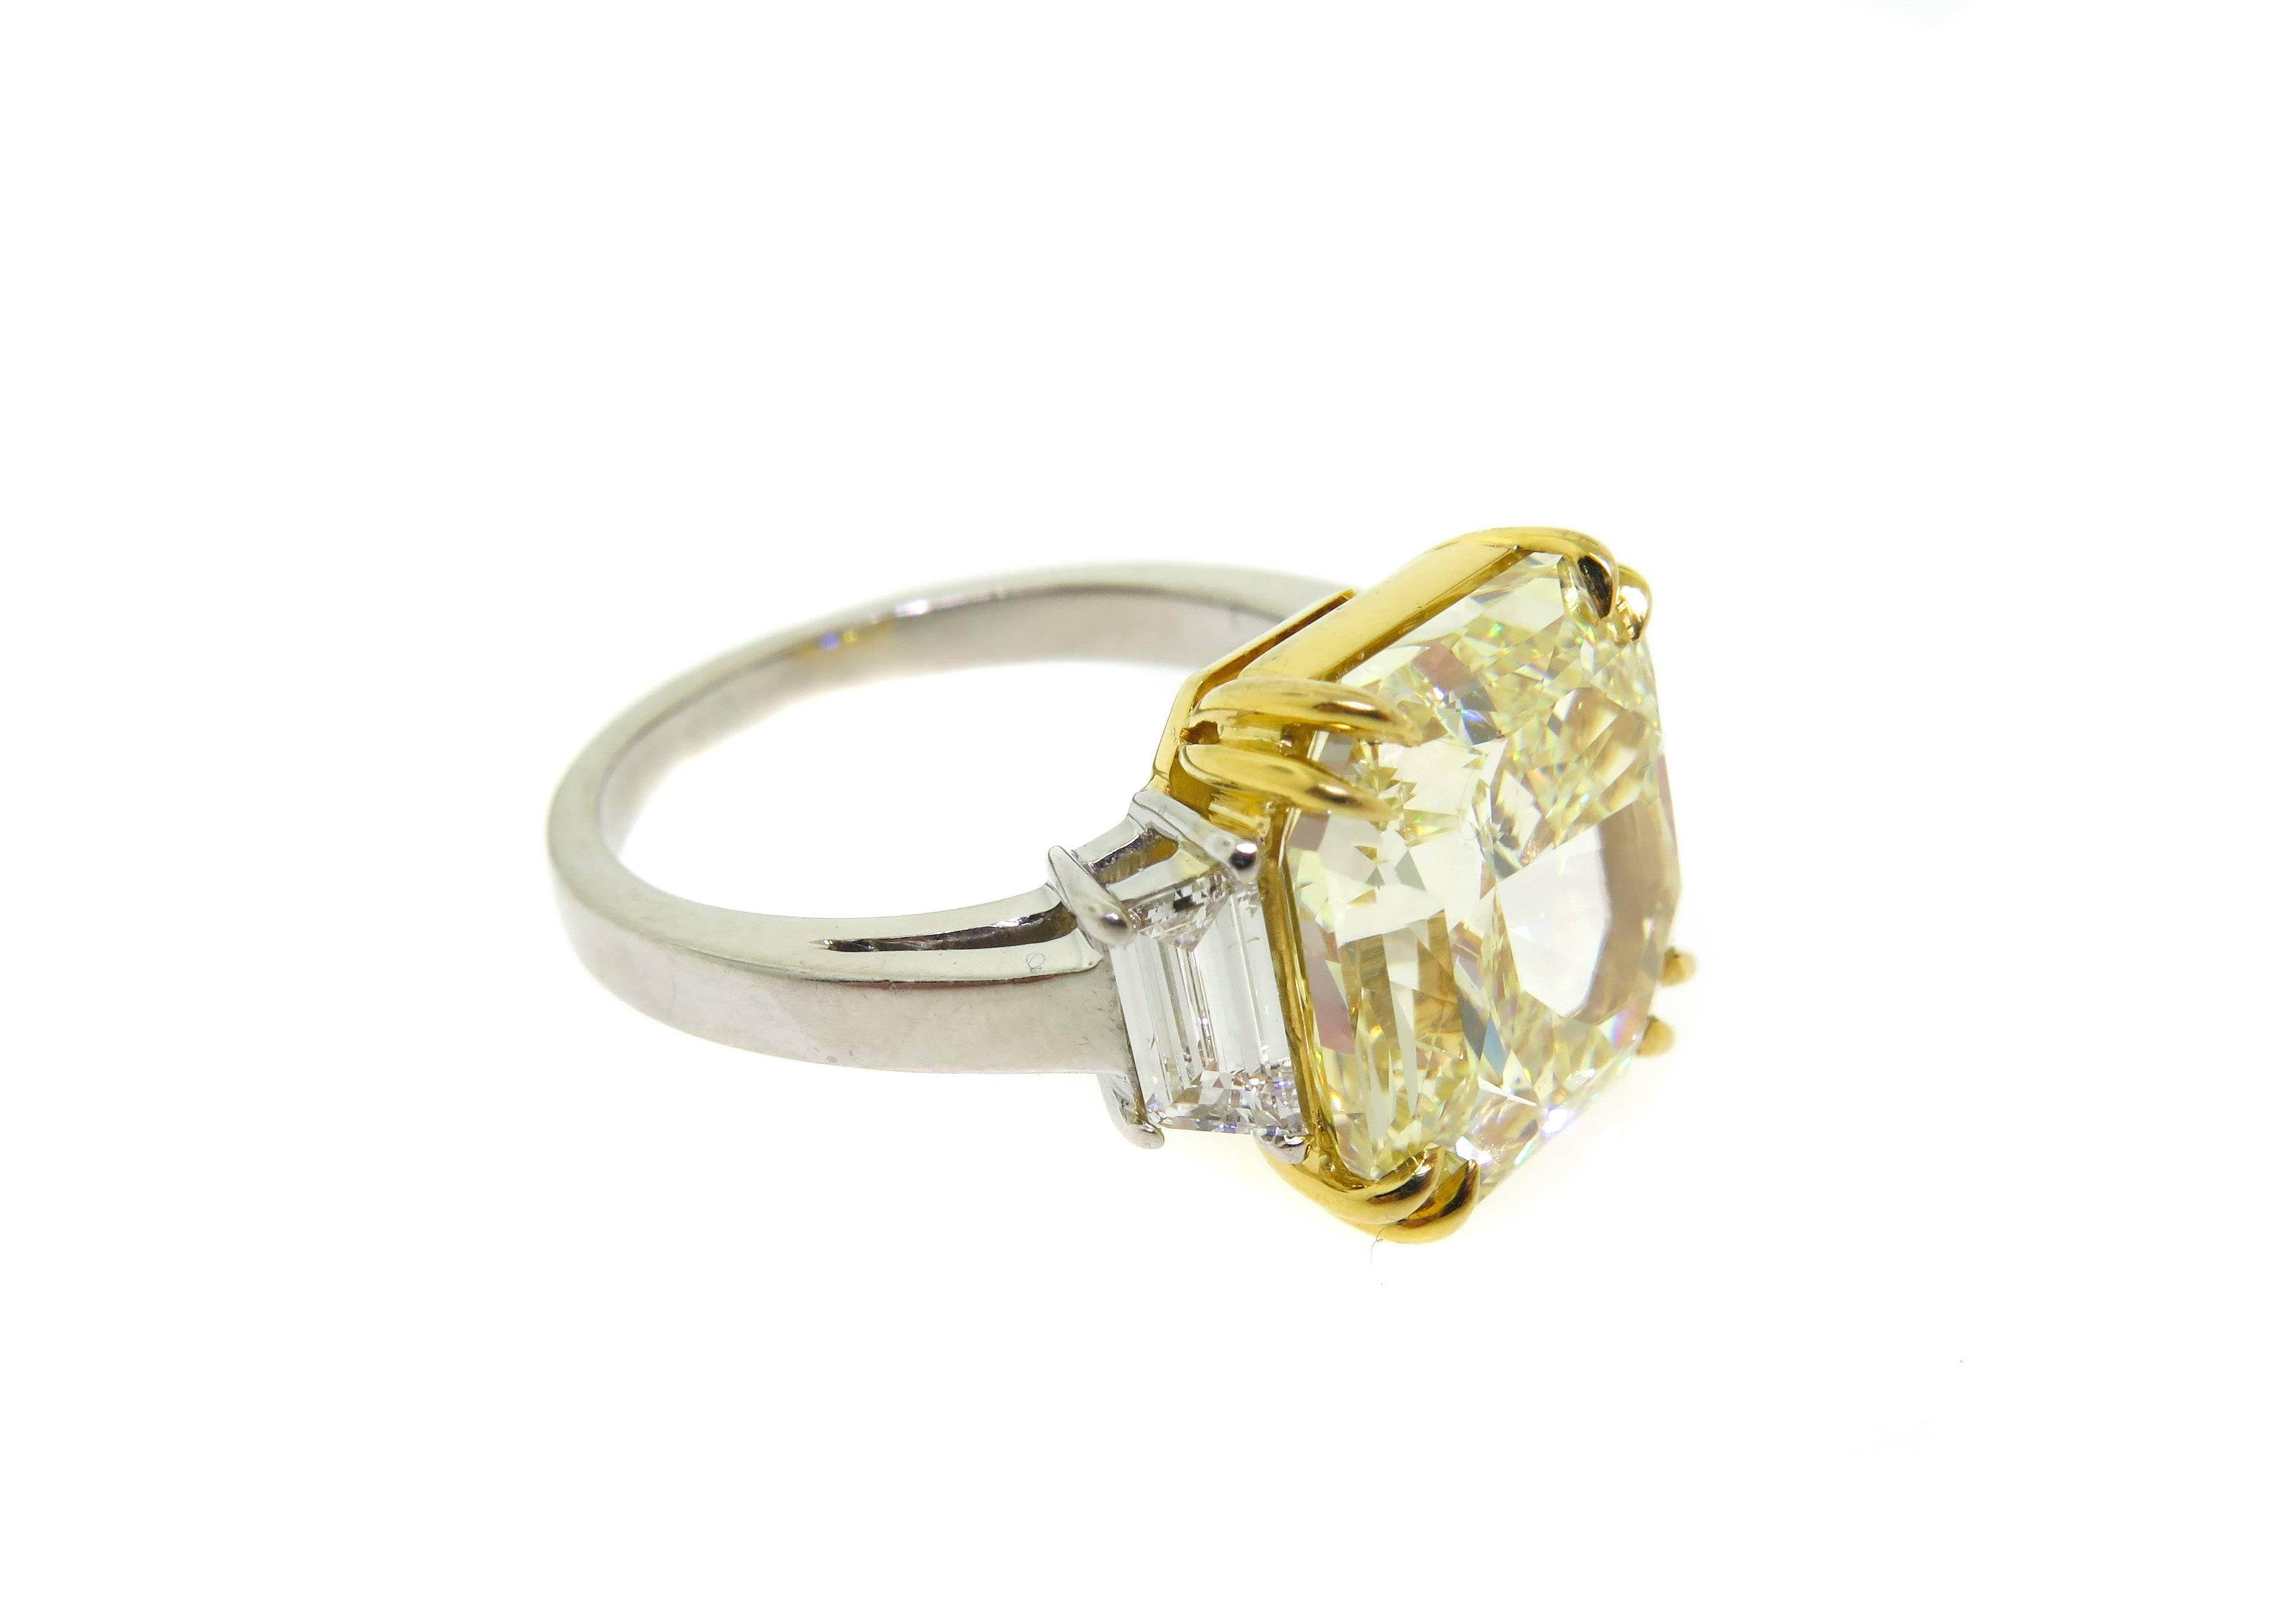 Magnificent 7.41 carat Radiant cut fancy yellow diamond hand set with trapezoids at either side in platinum. This diamond has an amazing yellow brilliance and fire. VS1 clarity GIA certified.
Finger size 6. 